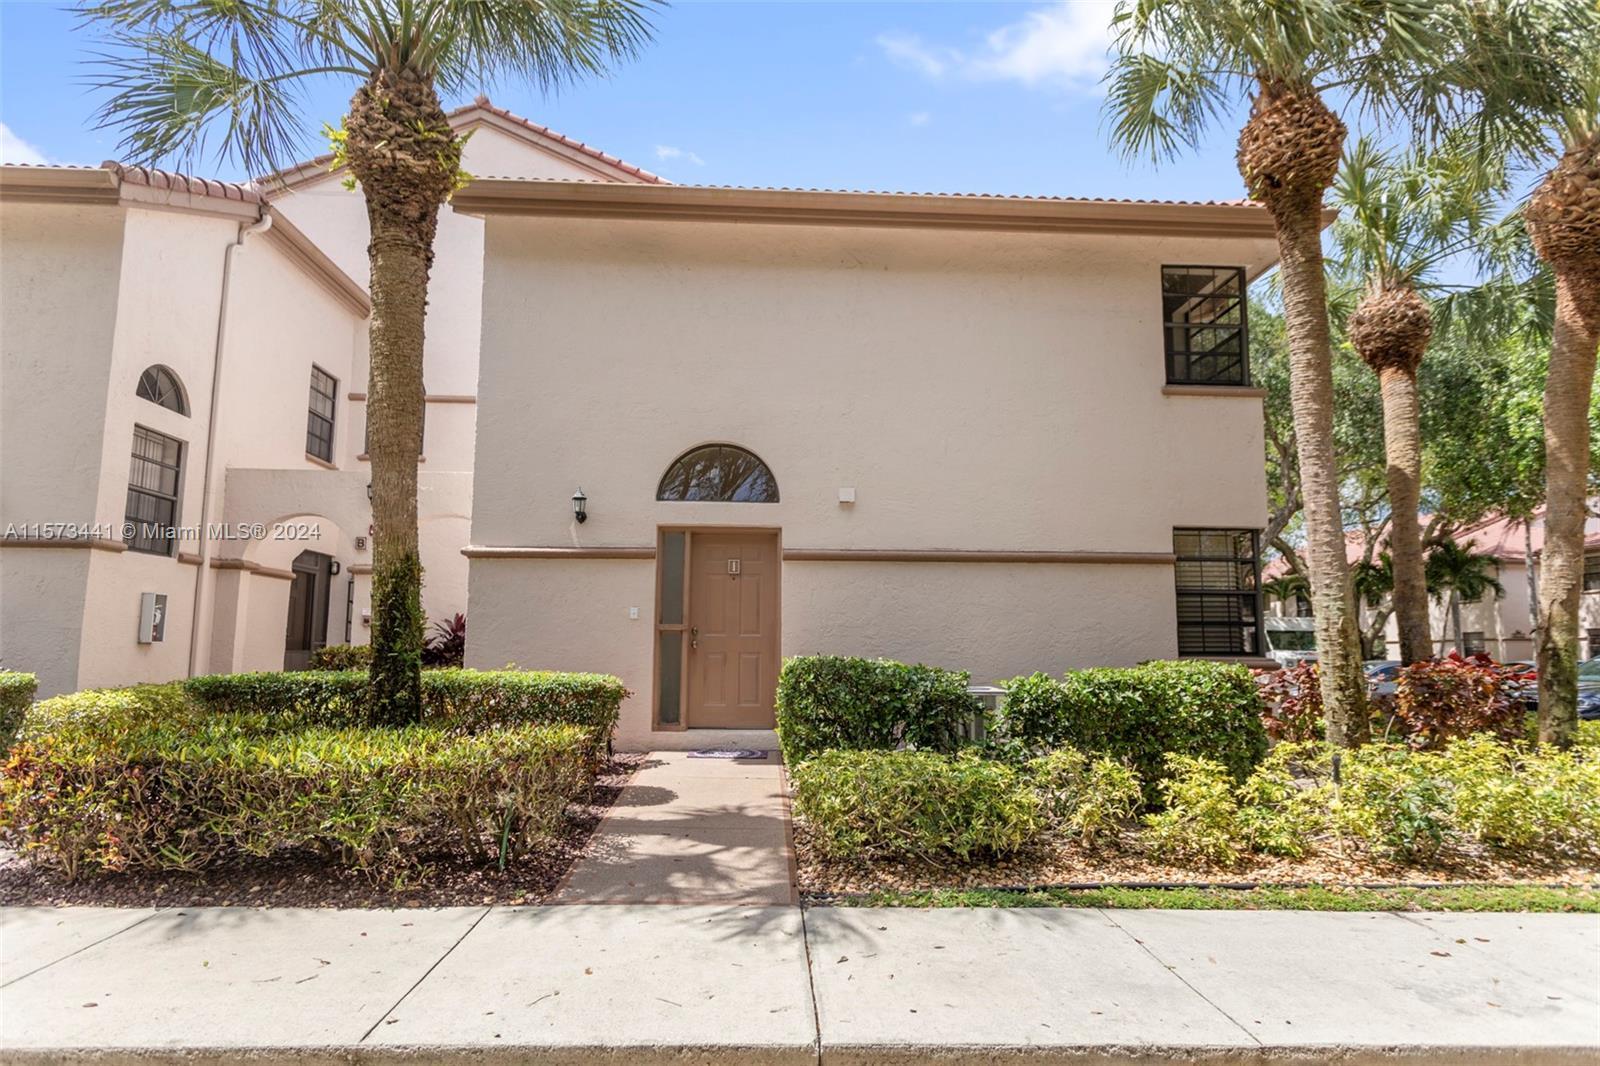 A great example of the illustrious city of Boynton Beach! This unit has an immaculate character that